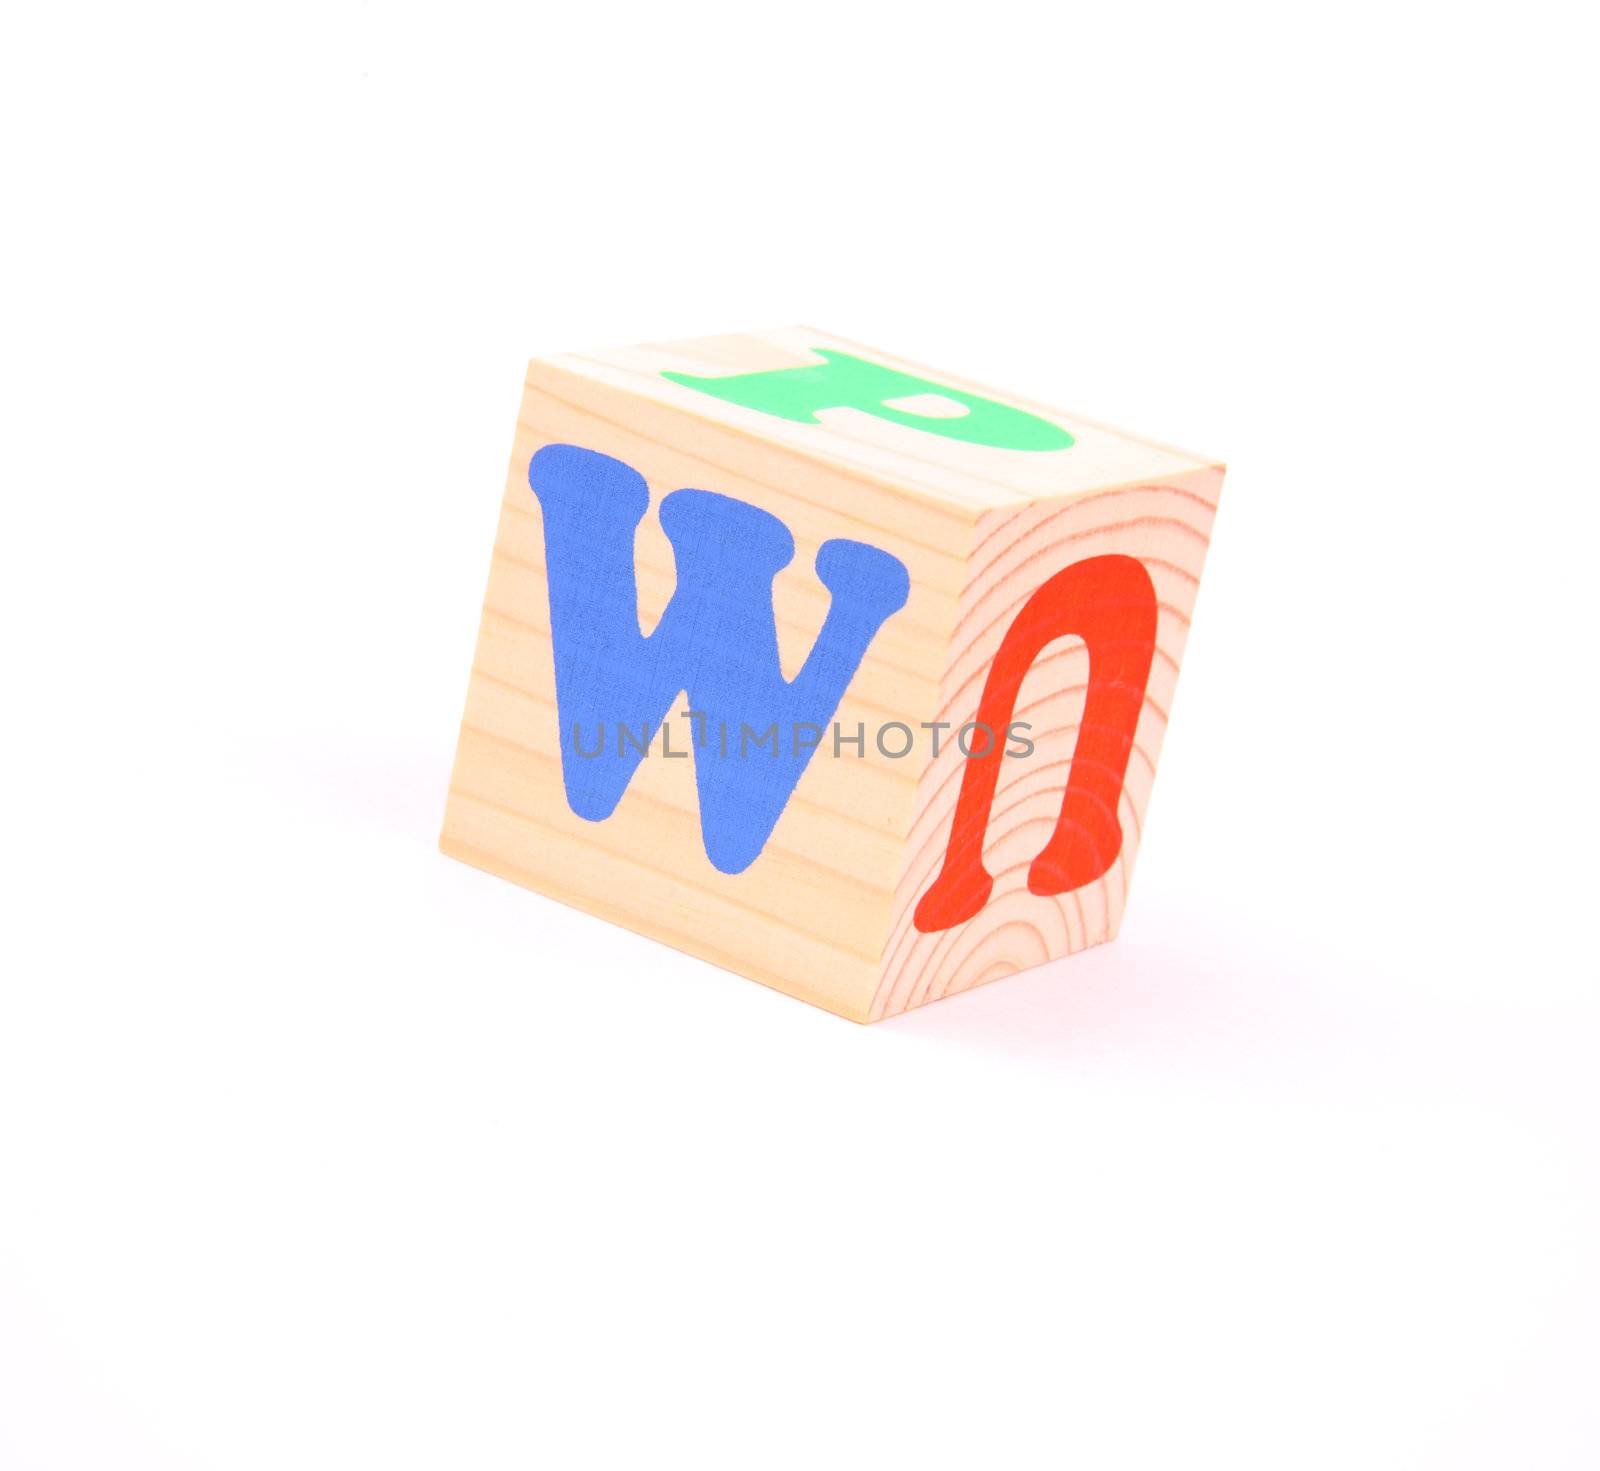 child brick with letter W, isolated on white background